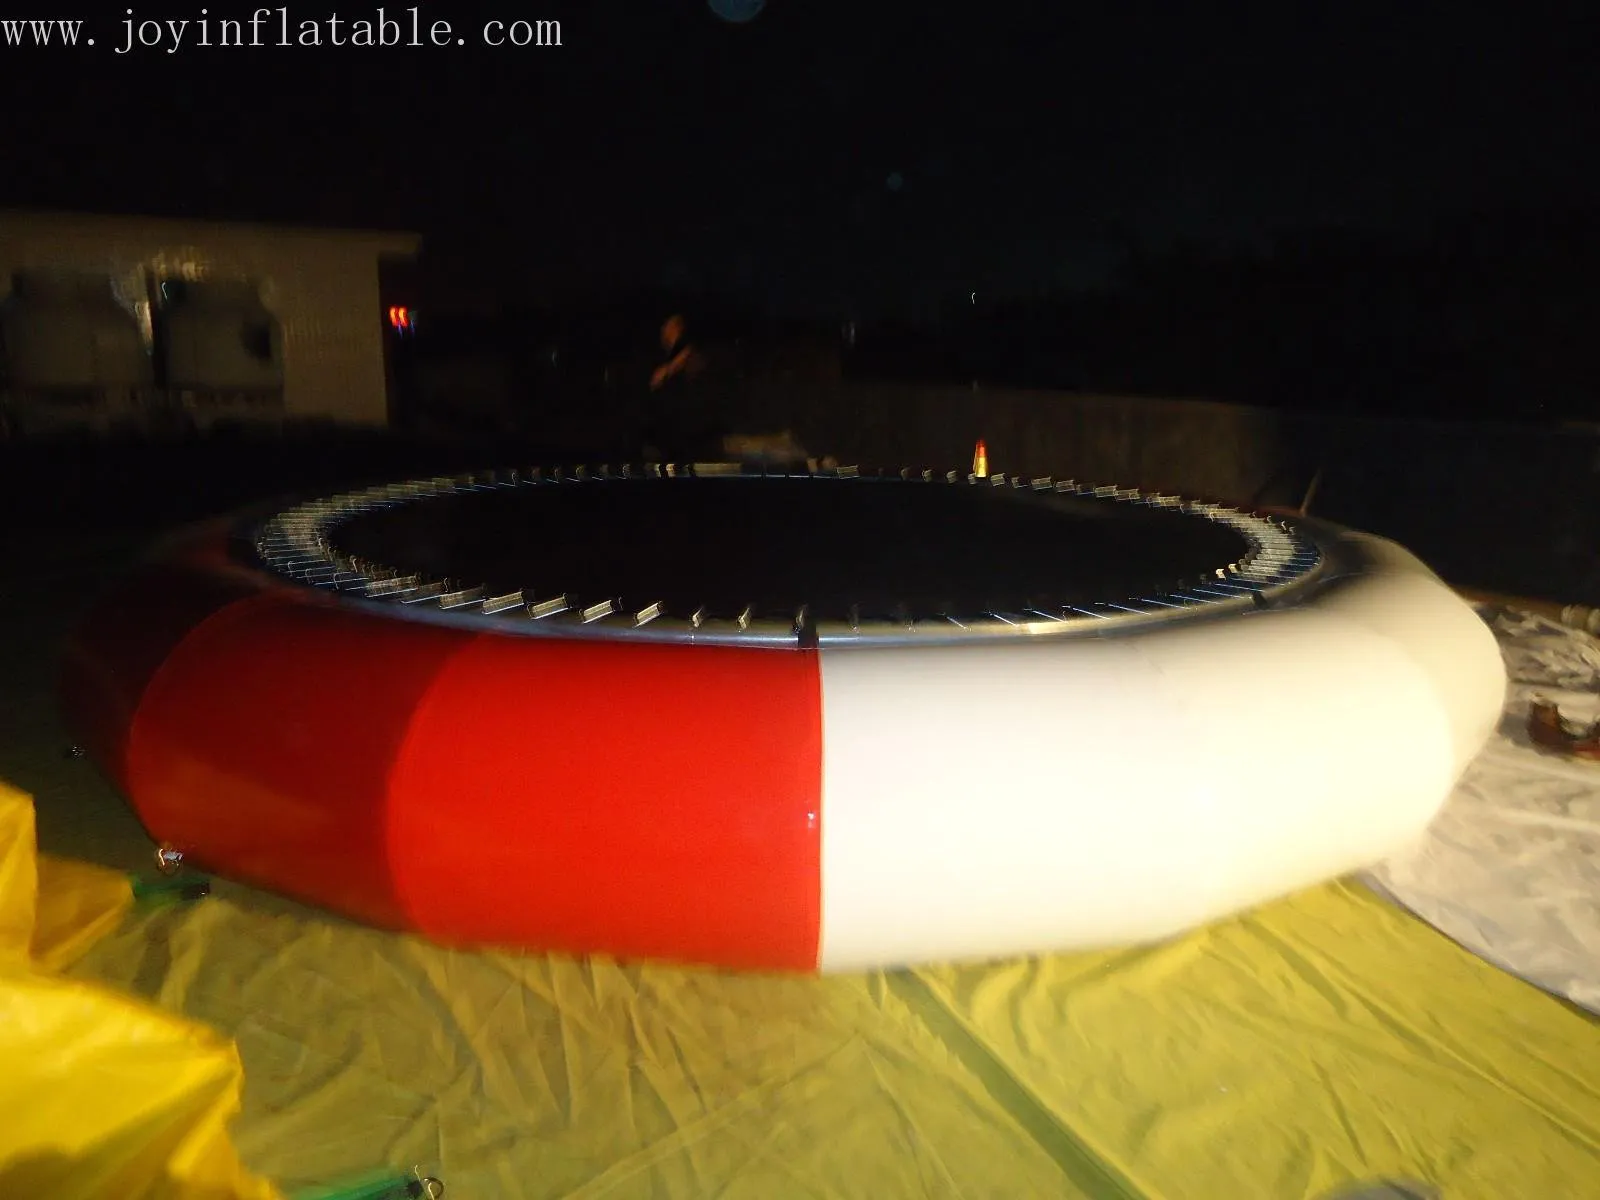 obstacle trendy floating water park floating JOY inflatable